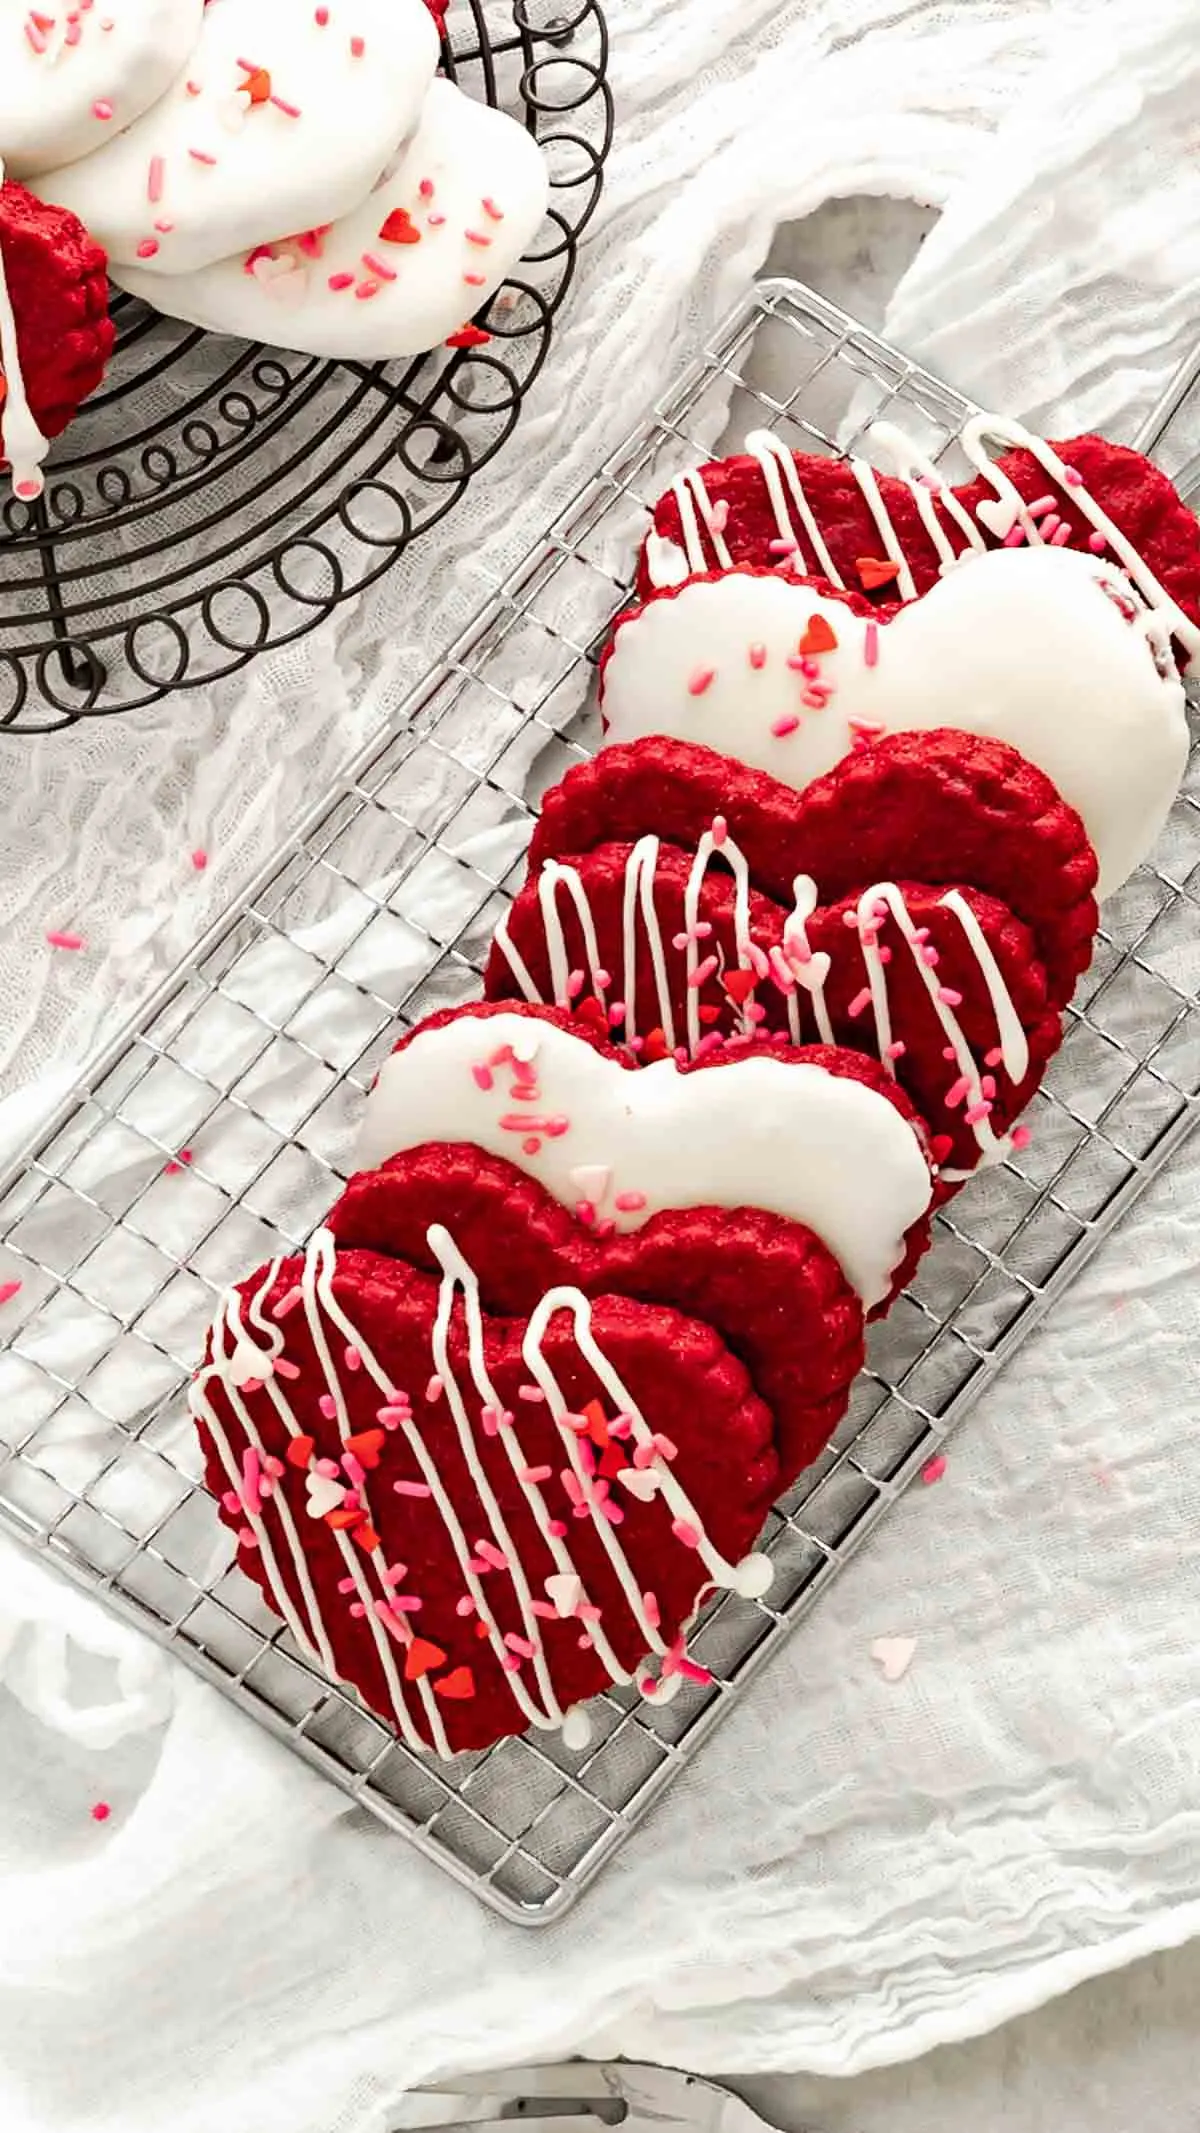 Heart shaped red velvet shortbread cookies decorated for Valentine's Day.